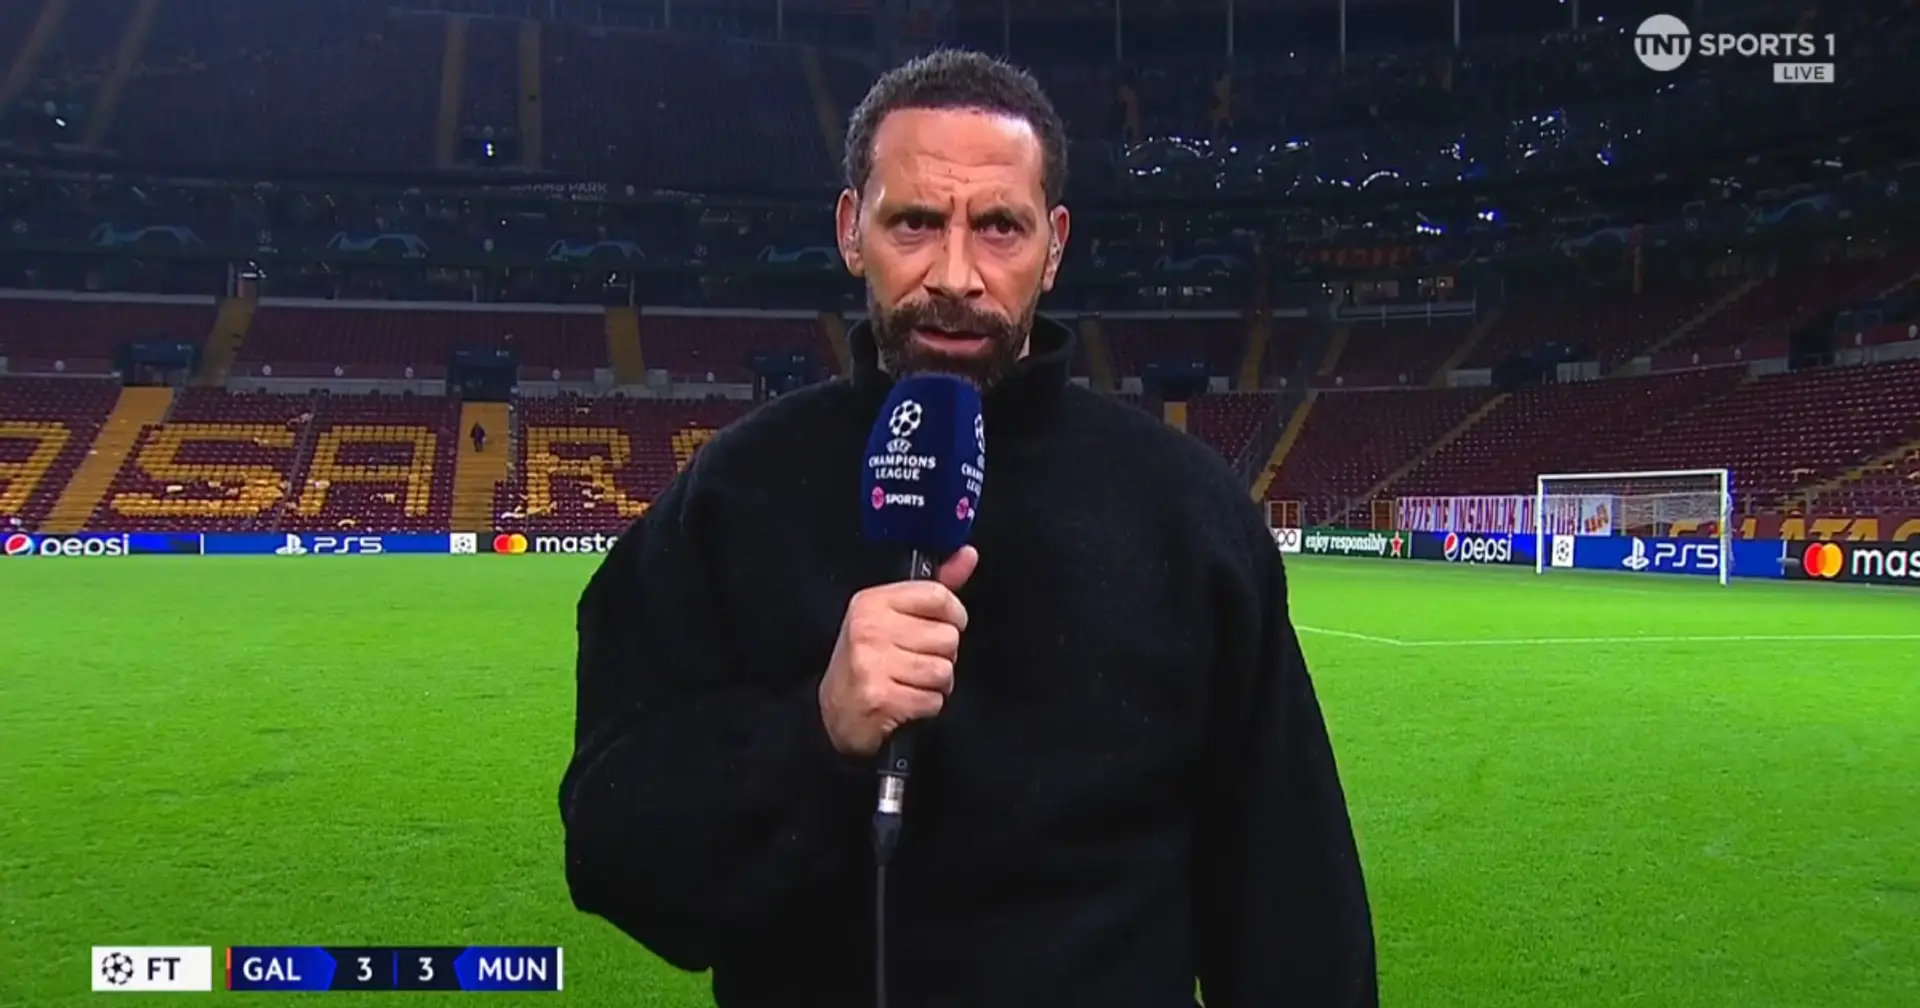 Rio Ferdinand: 'You can't score 9 goals in 3 away Champions League games and have one point'